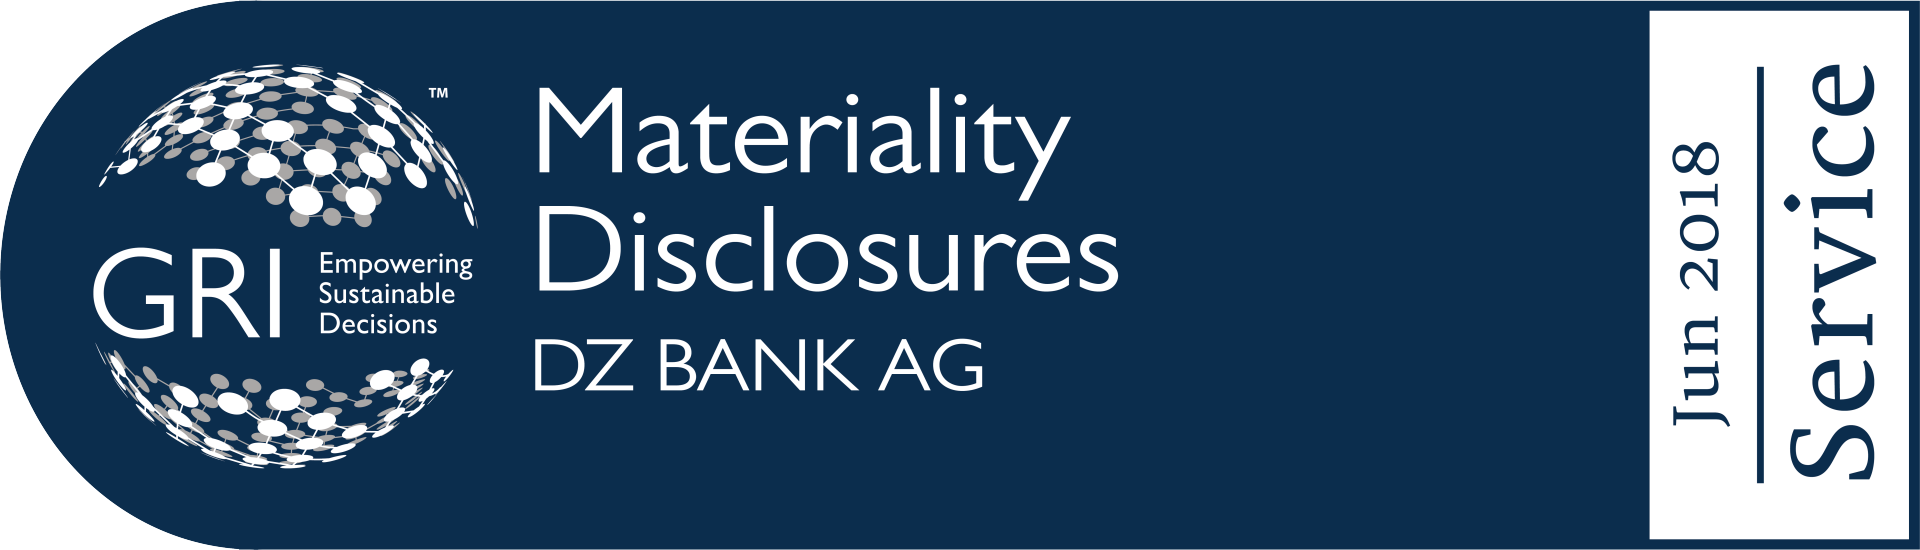 Materiality Disclosures